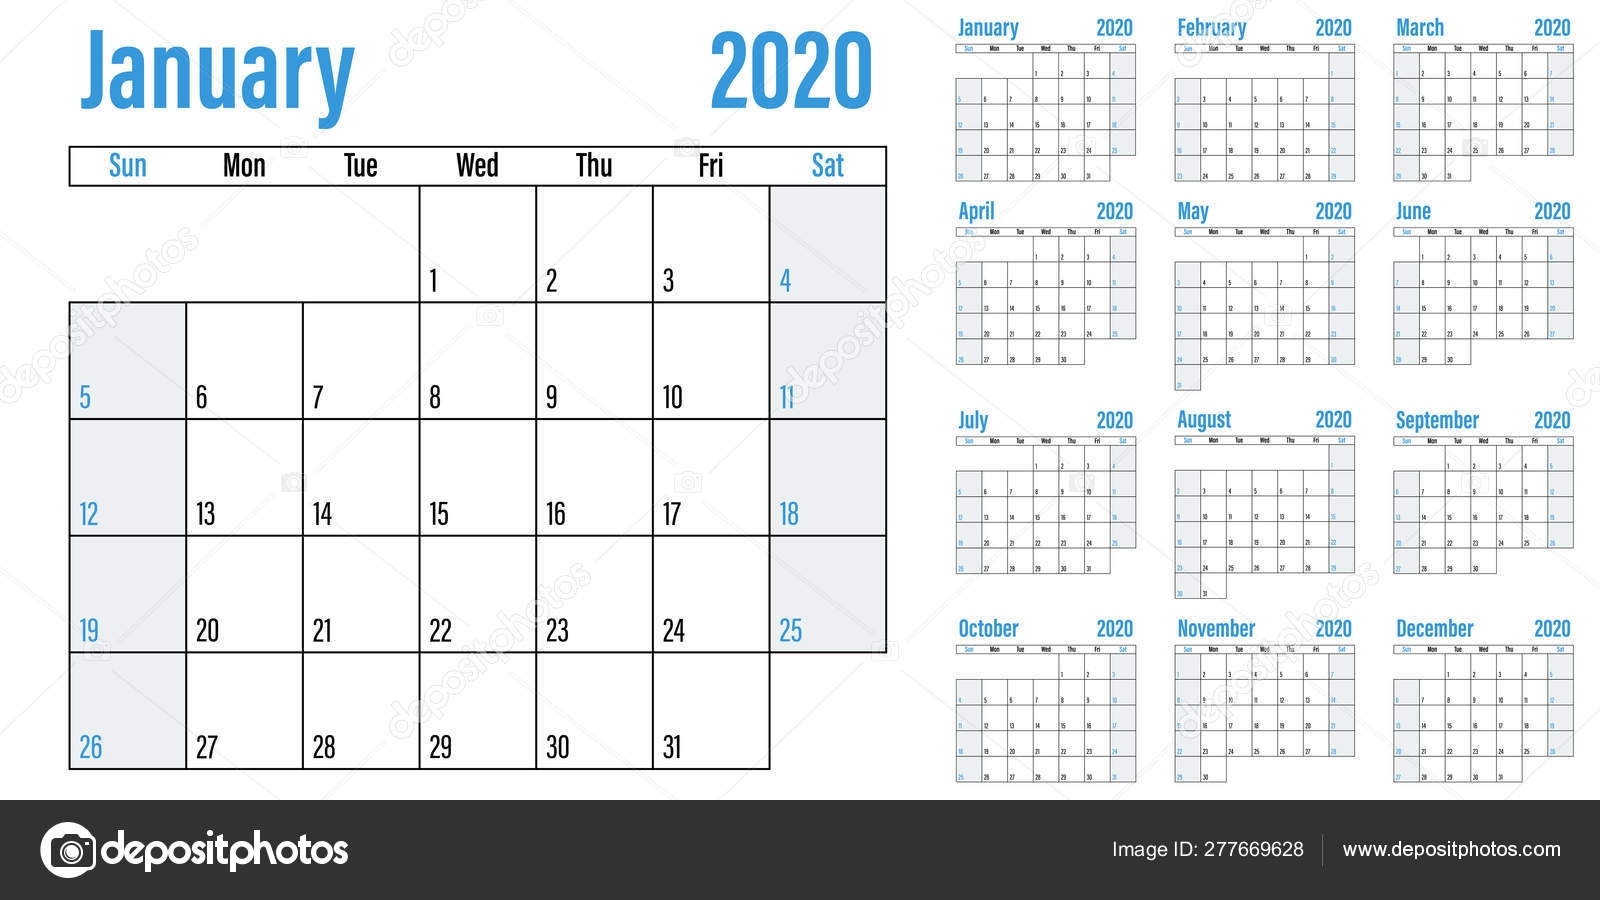 Calendar Planner 2020 Template Vector Illustration All Exceptional Calendar Of 2020 Indicating Week Numbers